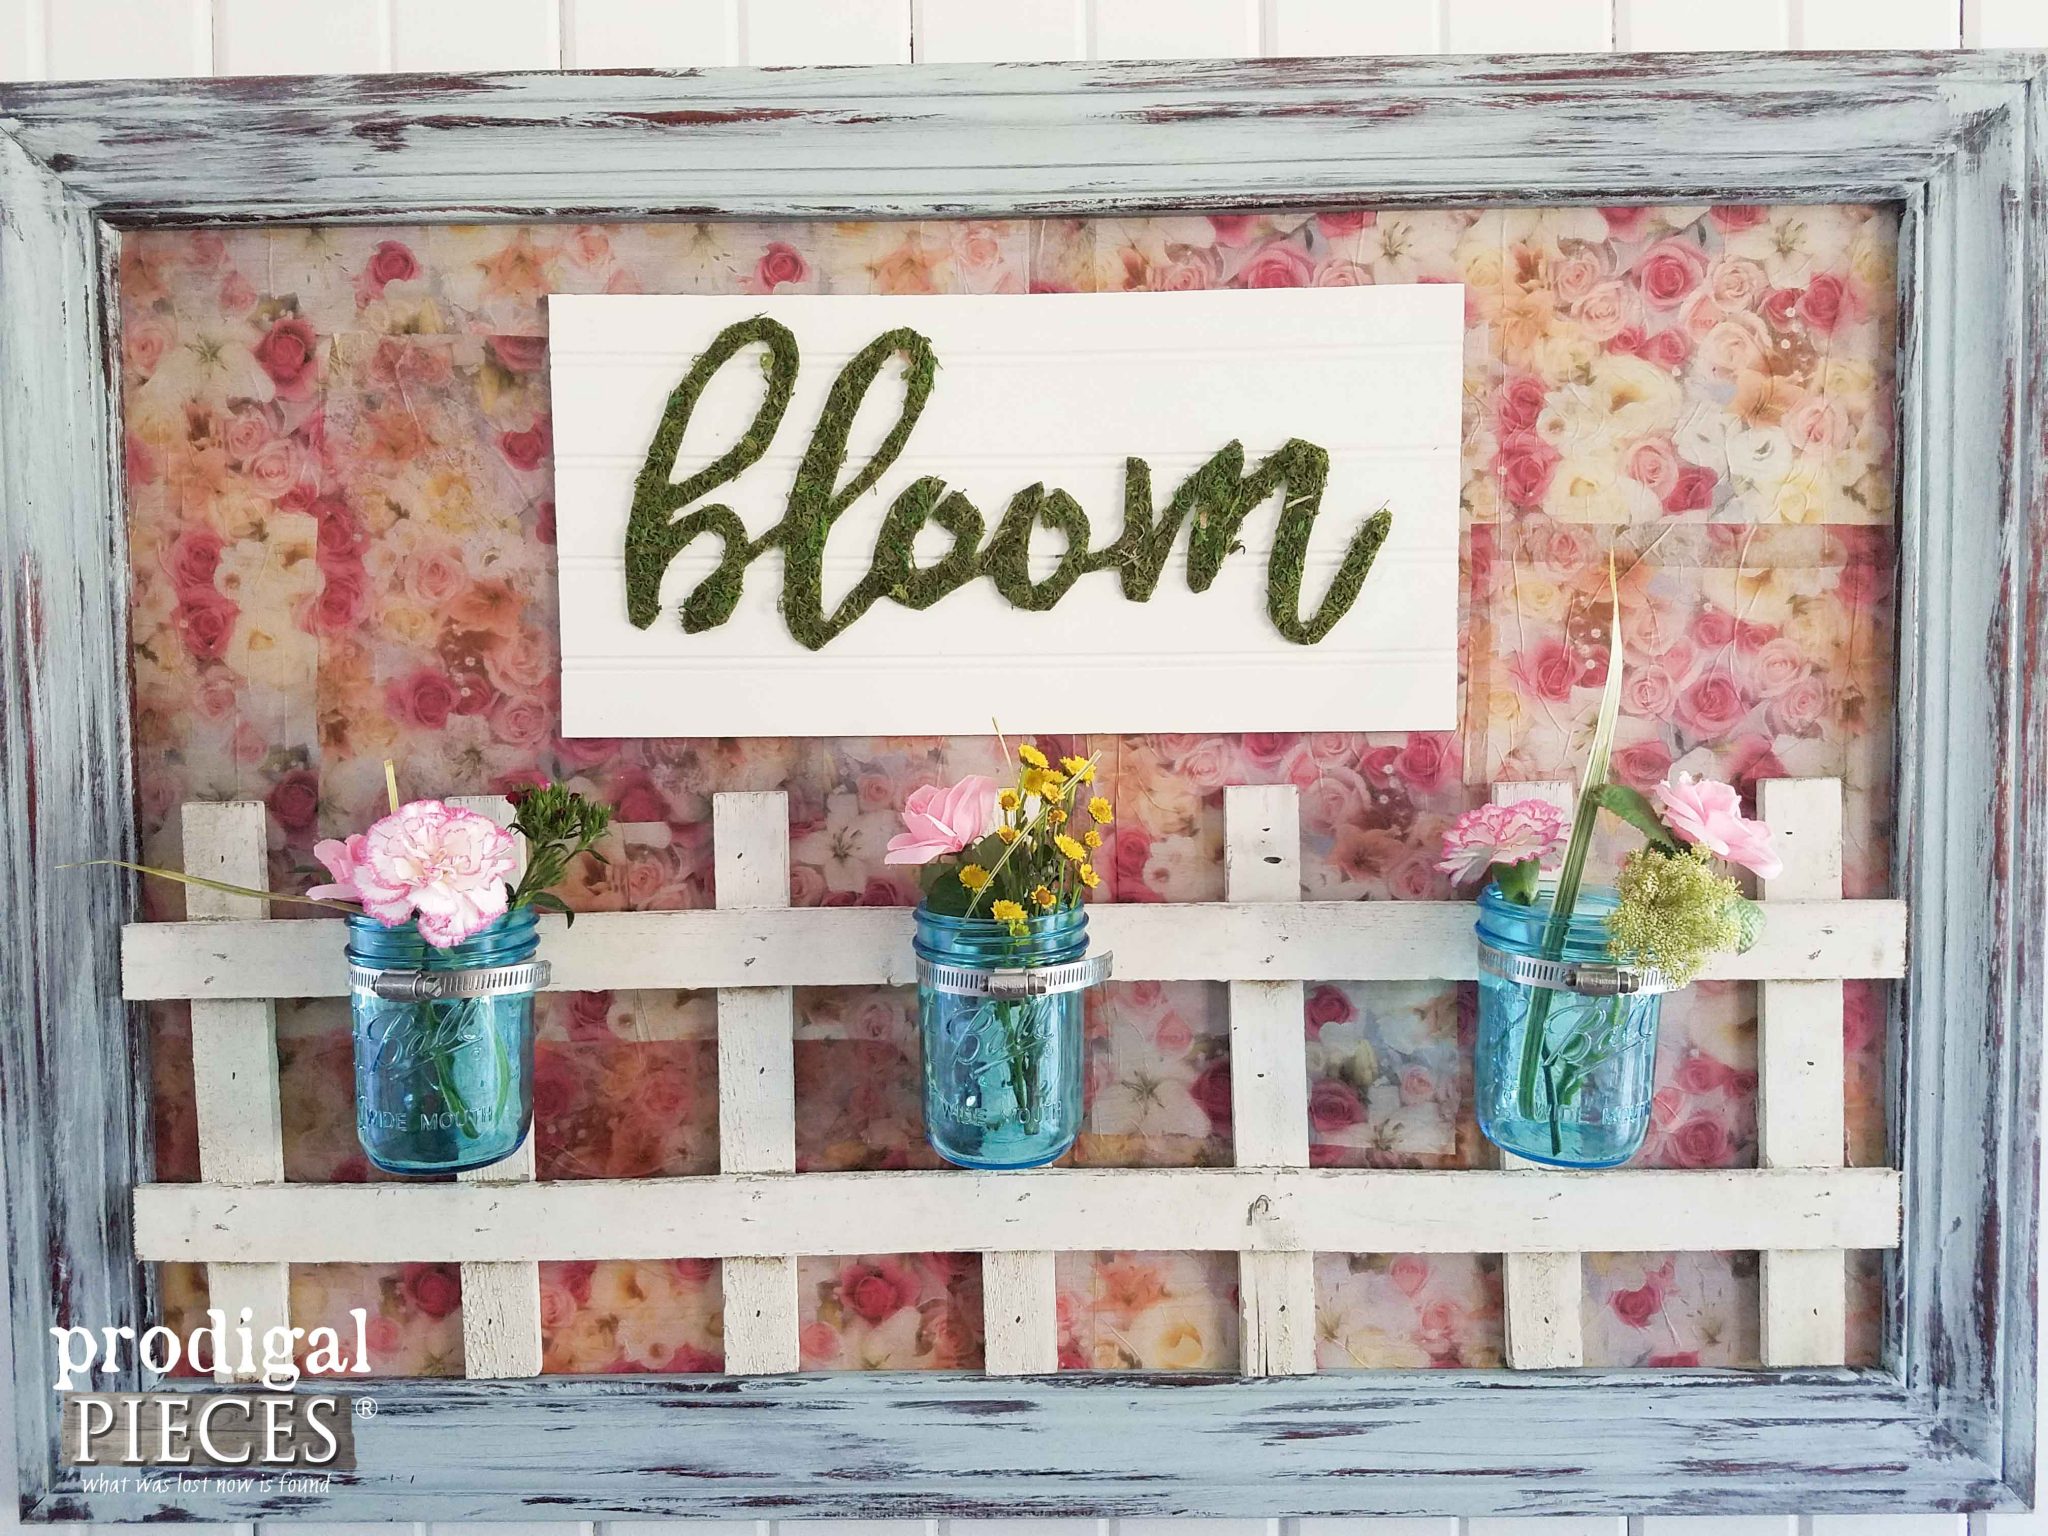 "Bloom" Wall Art with Ball Jar Vases and Repurposed Parts by Prodigal Pieces | prodigalpieces.com